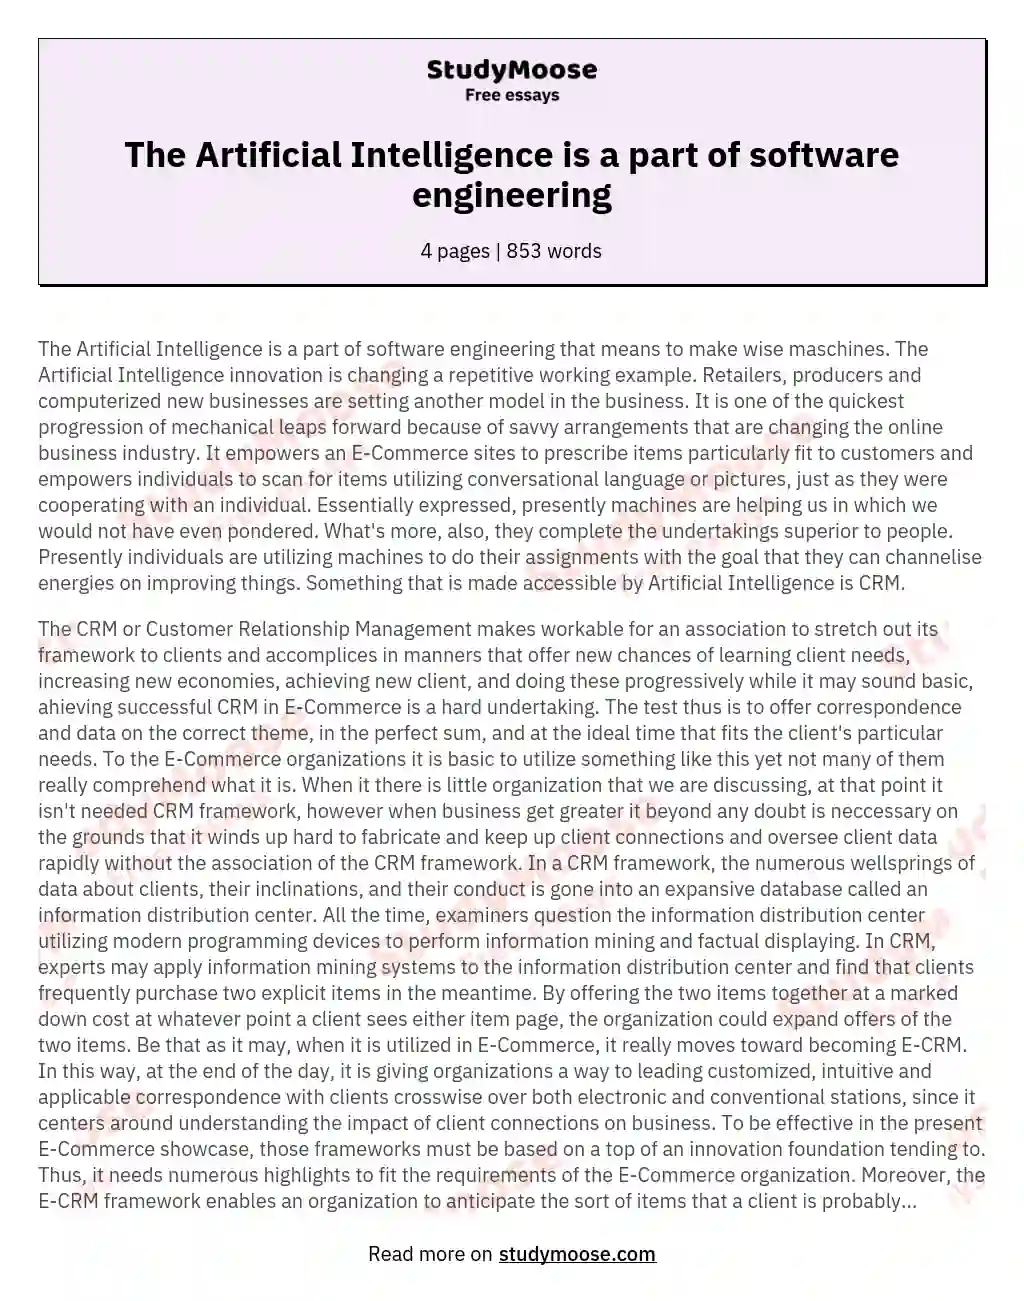 The Artificial Intelligence is a part of software engineering essay